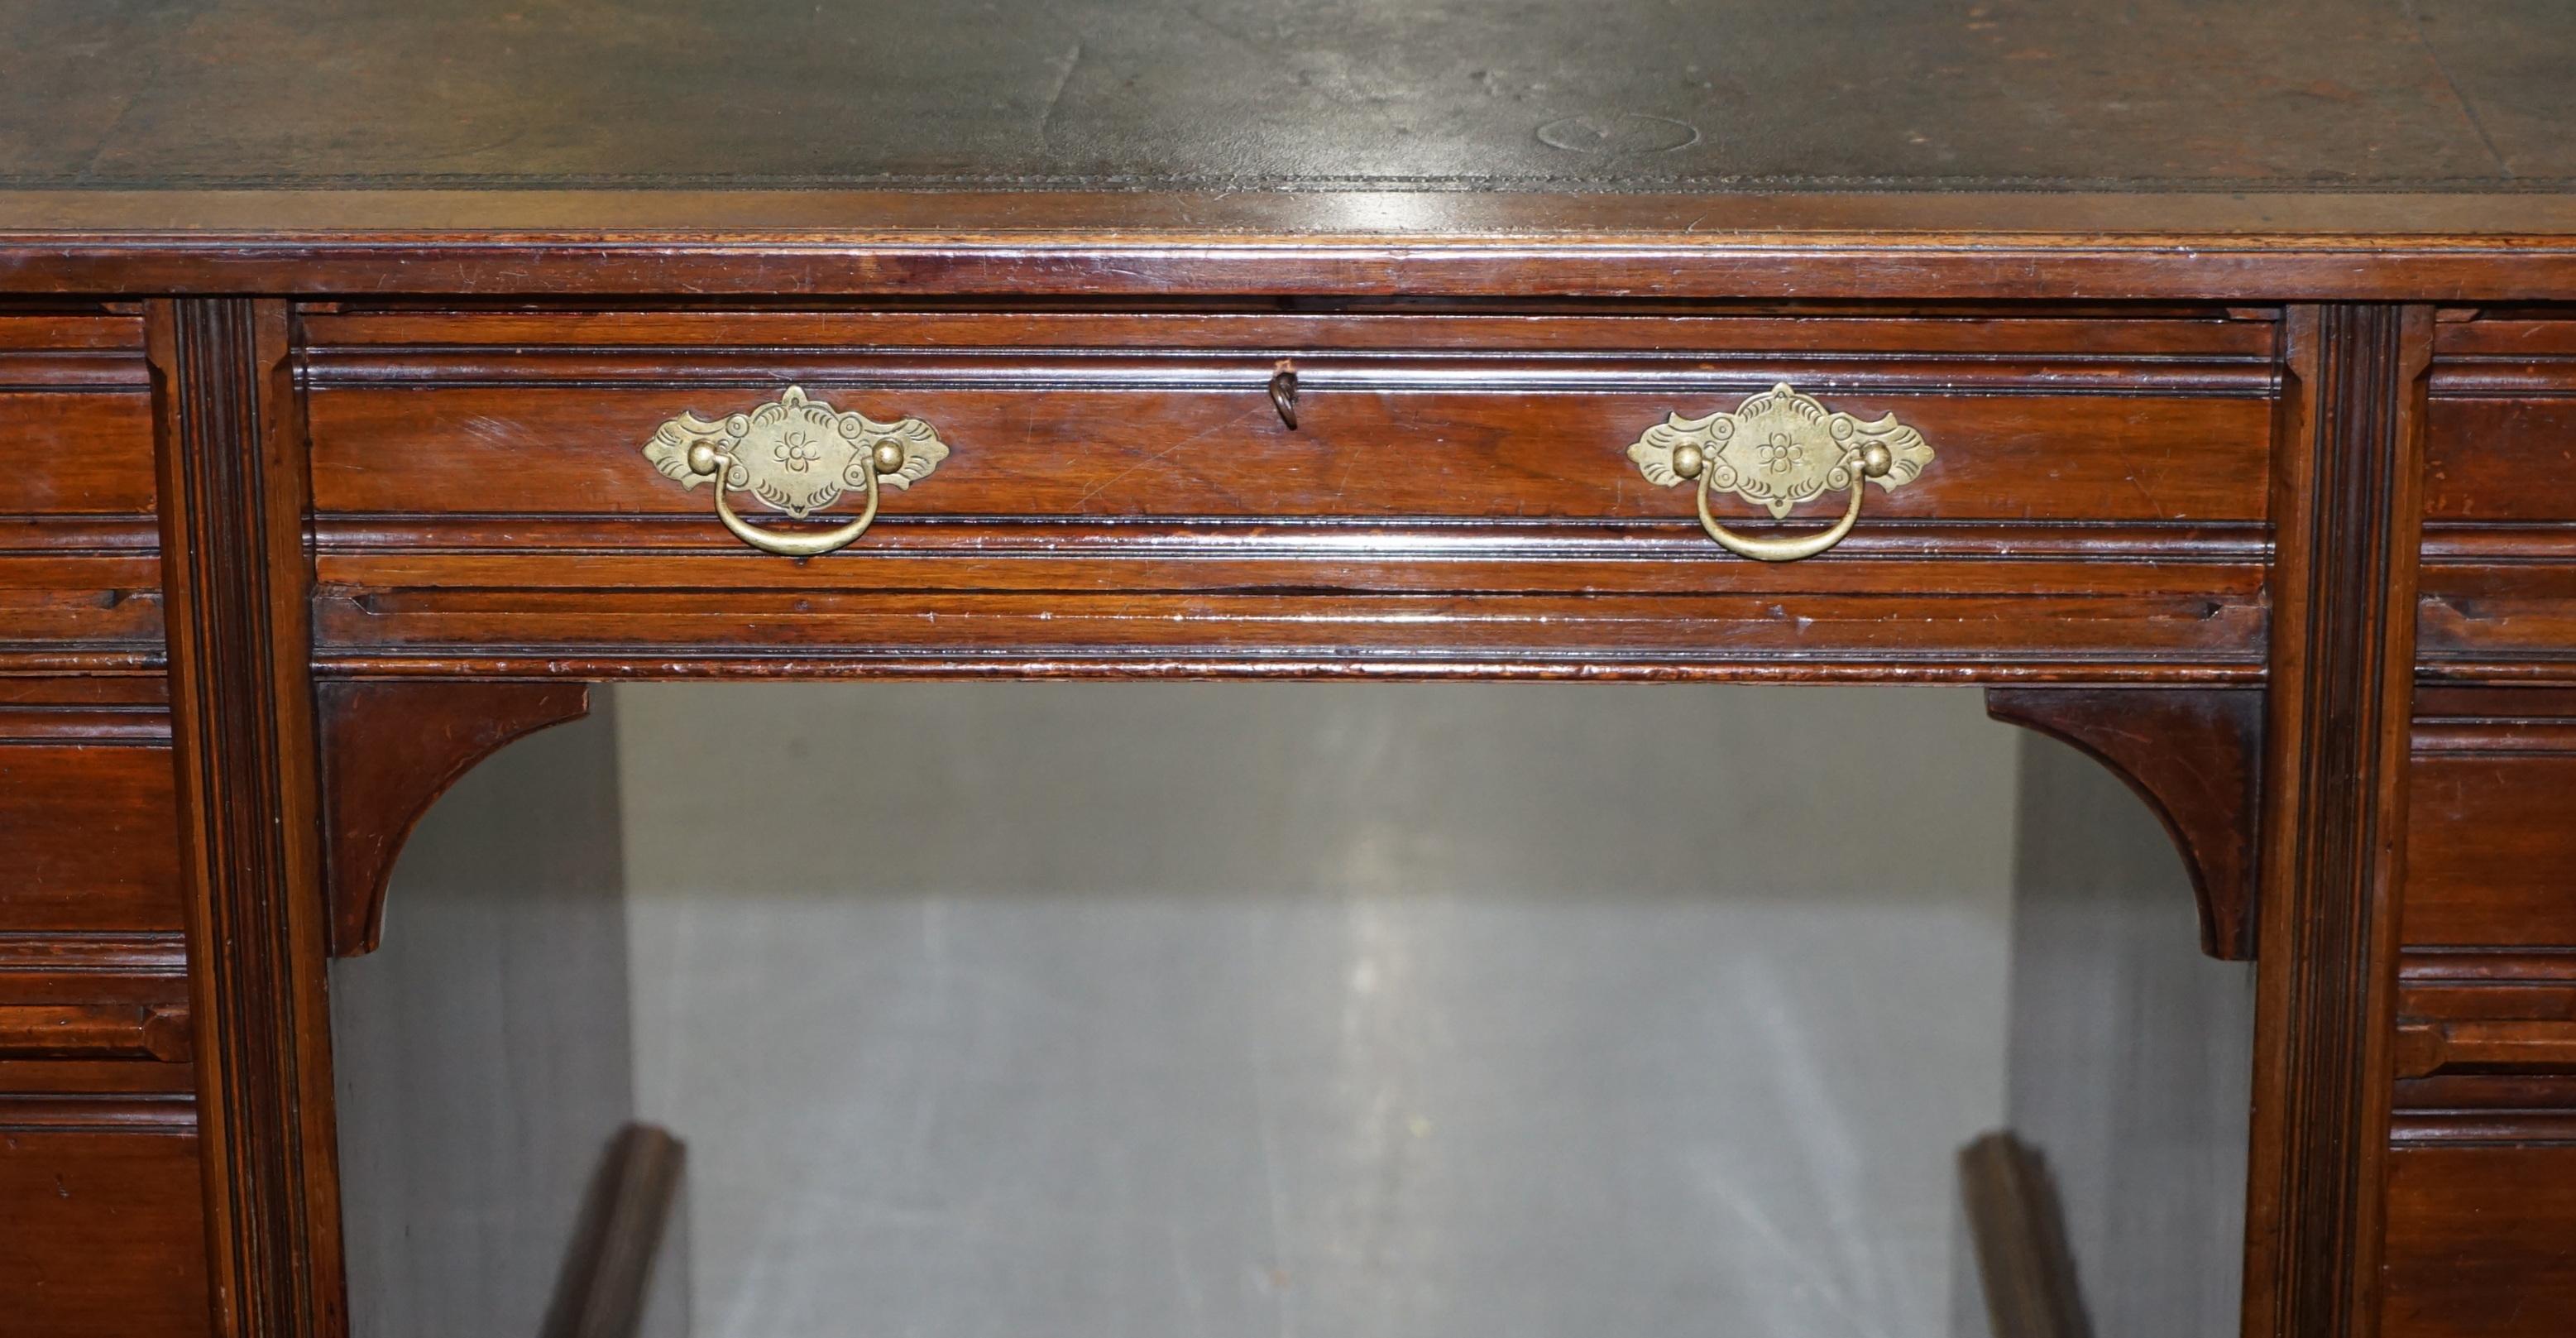 Hand-Carved Rare Hampton & Son's Pall Mall Hardwood Twin Pedestal Writing Partners Desk For Sale